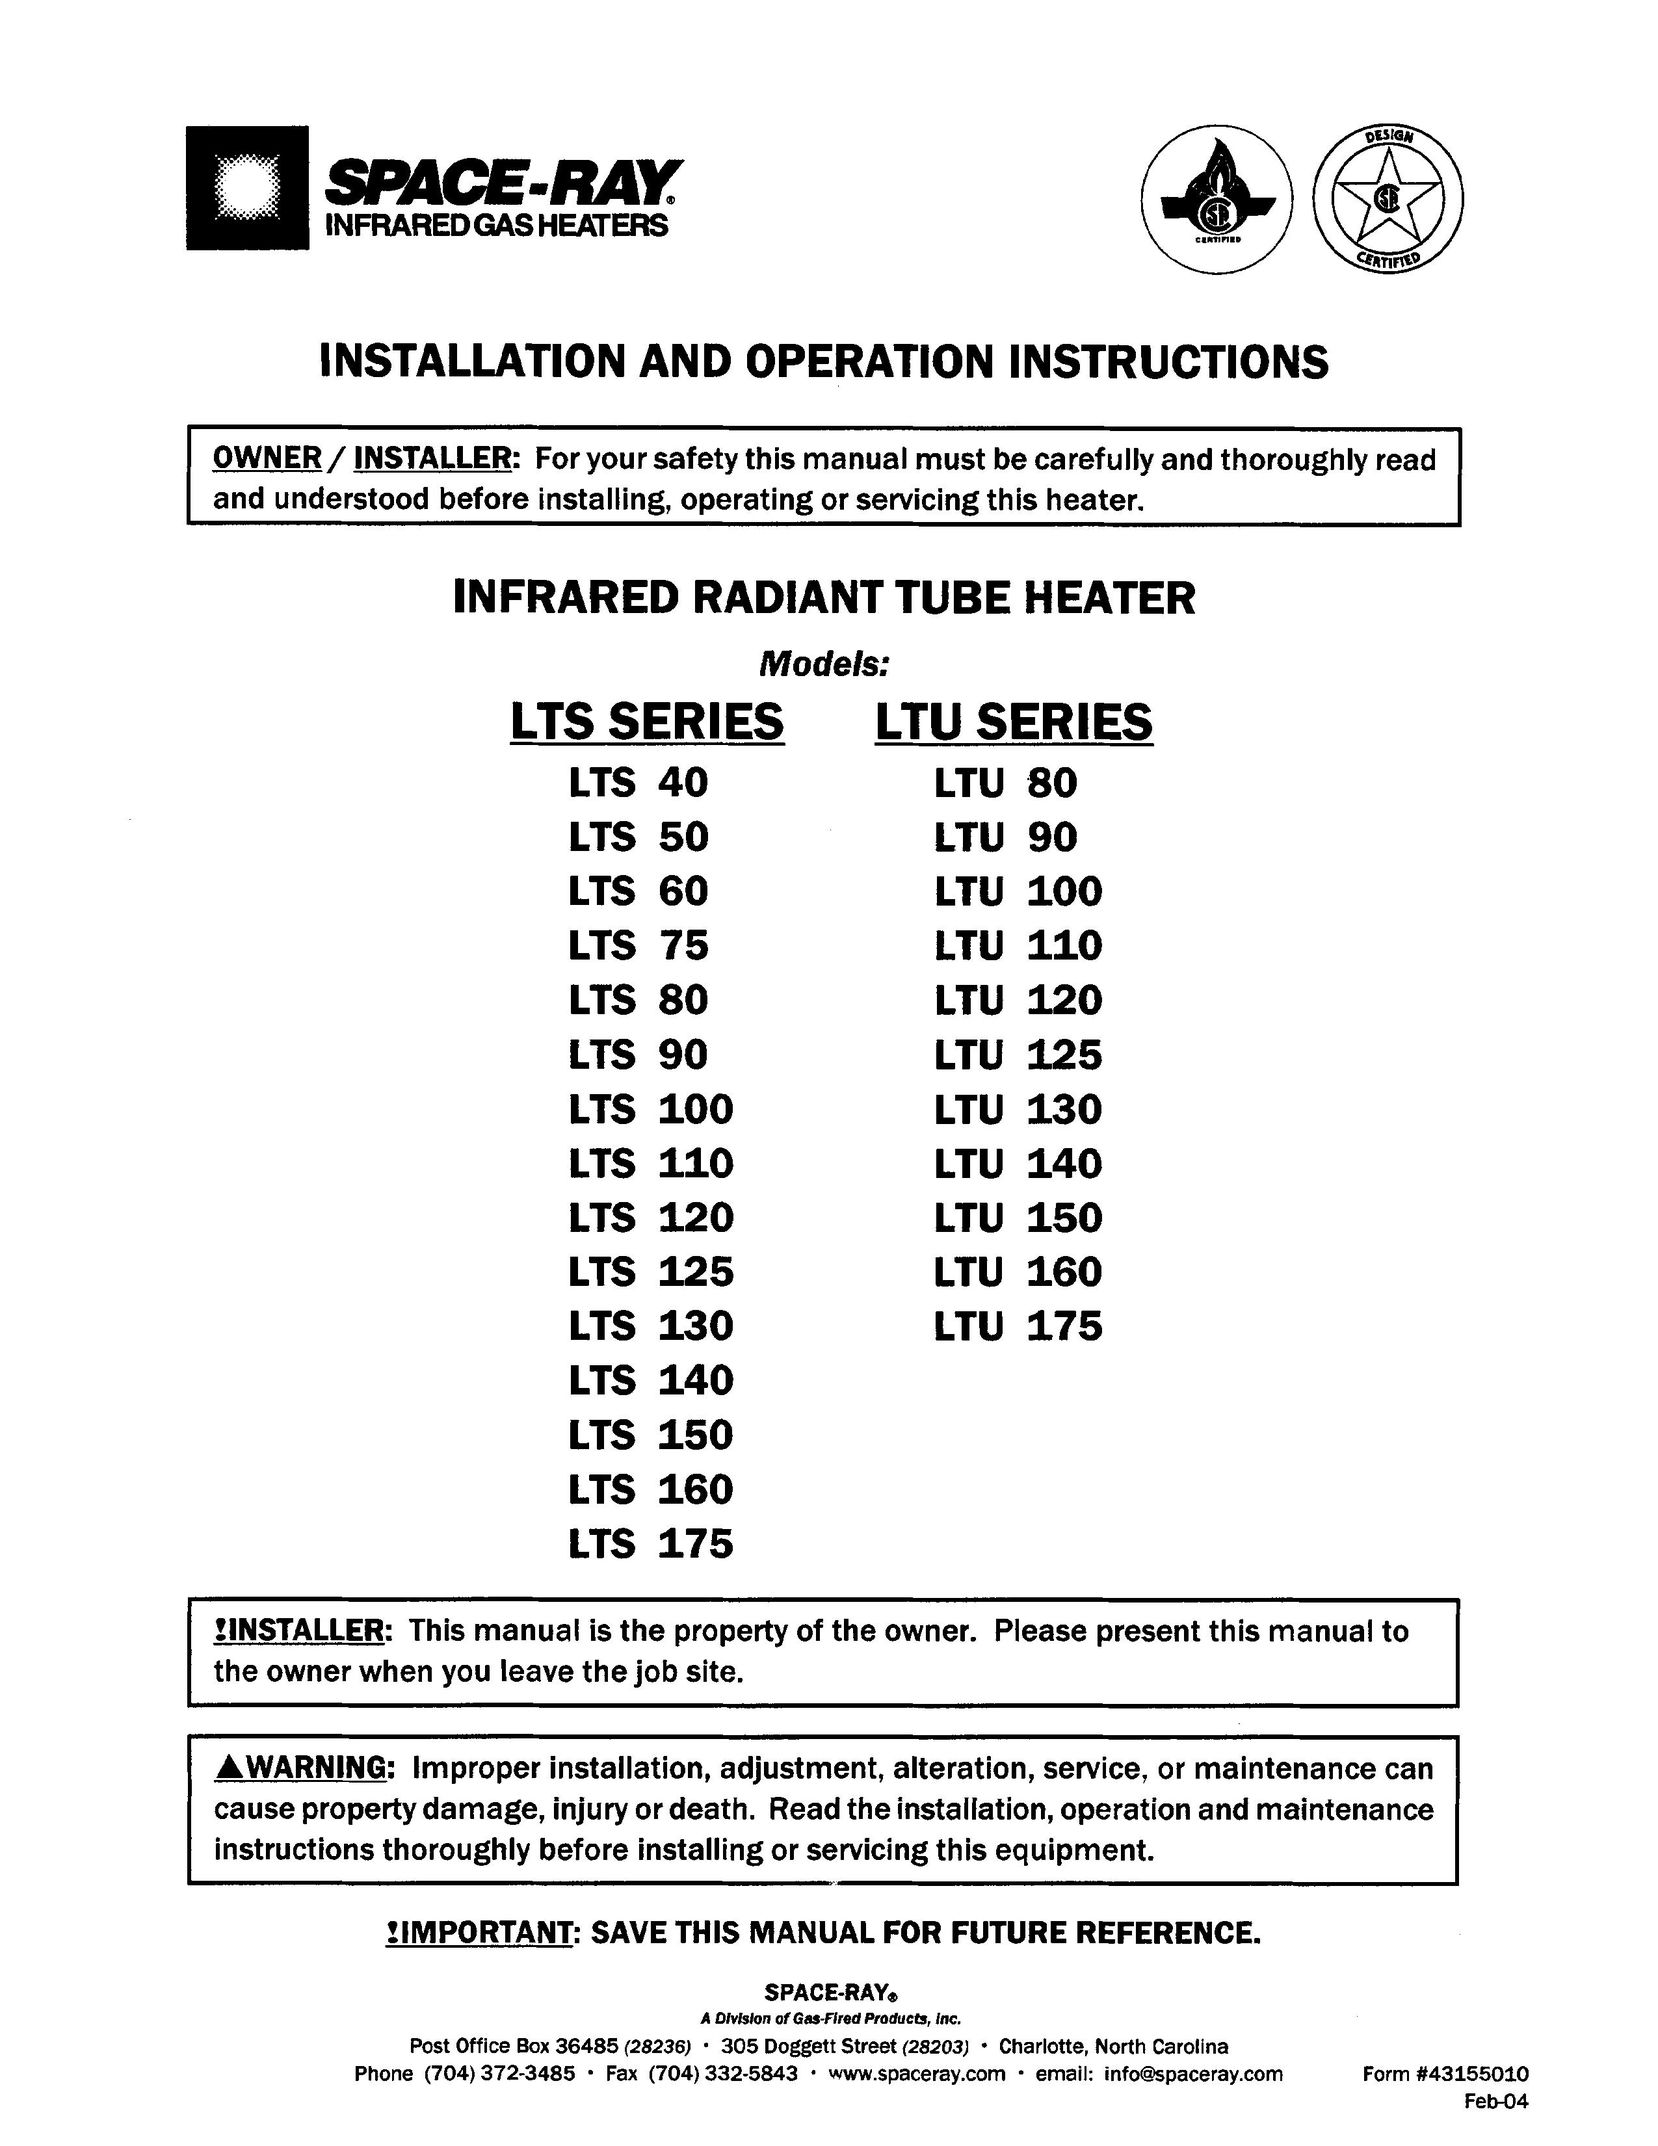 Gas-Fired Products LTU 110 Electric Heater User Manual